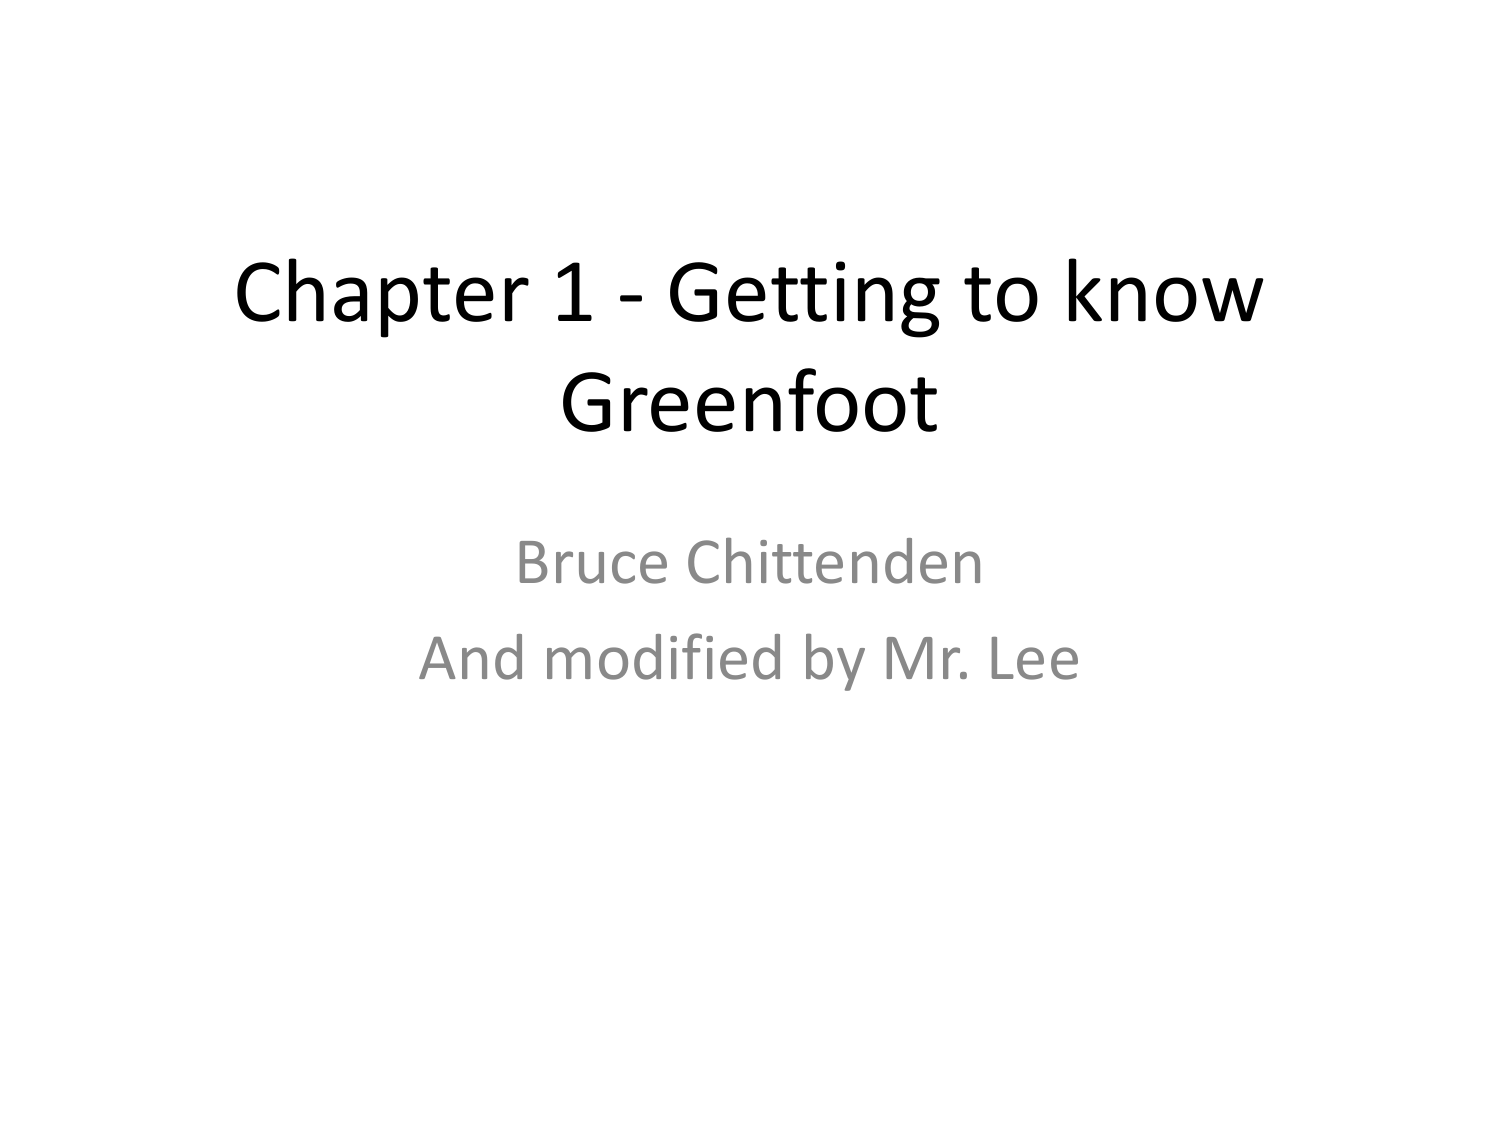 greenfoot chapter 2